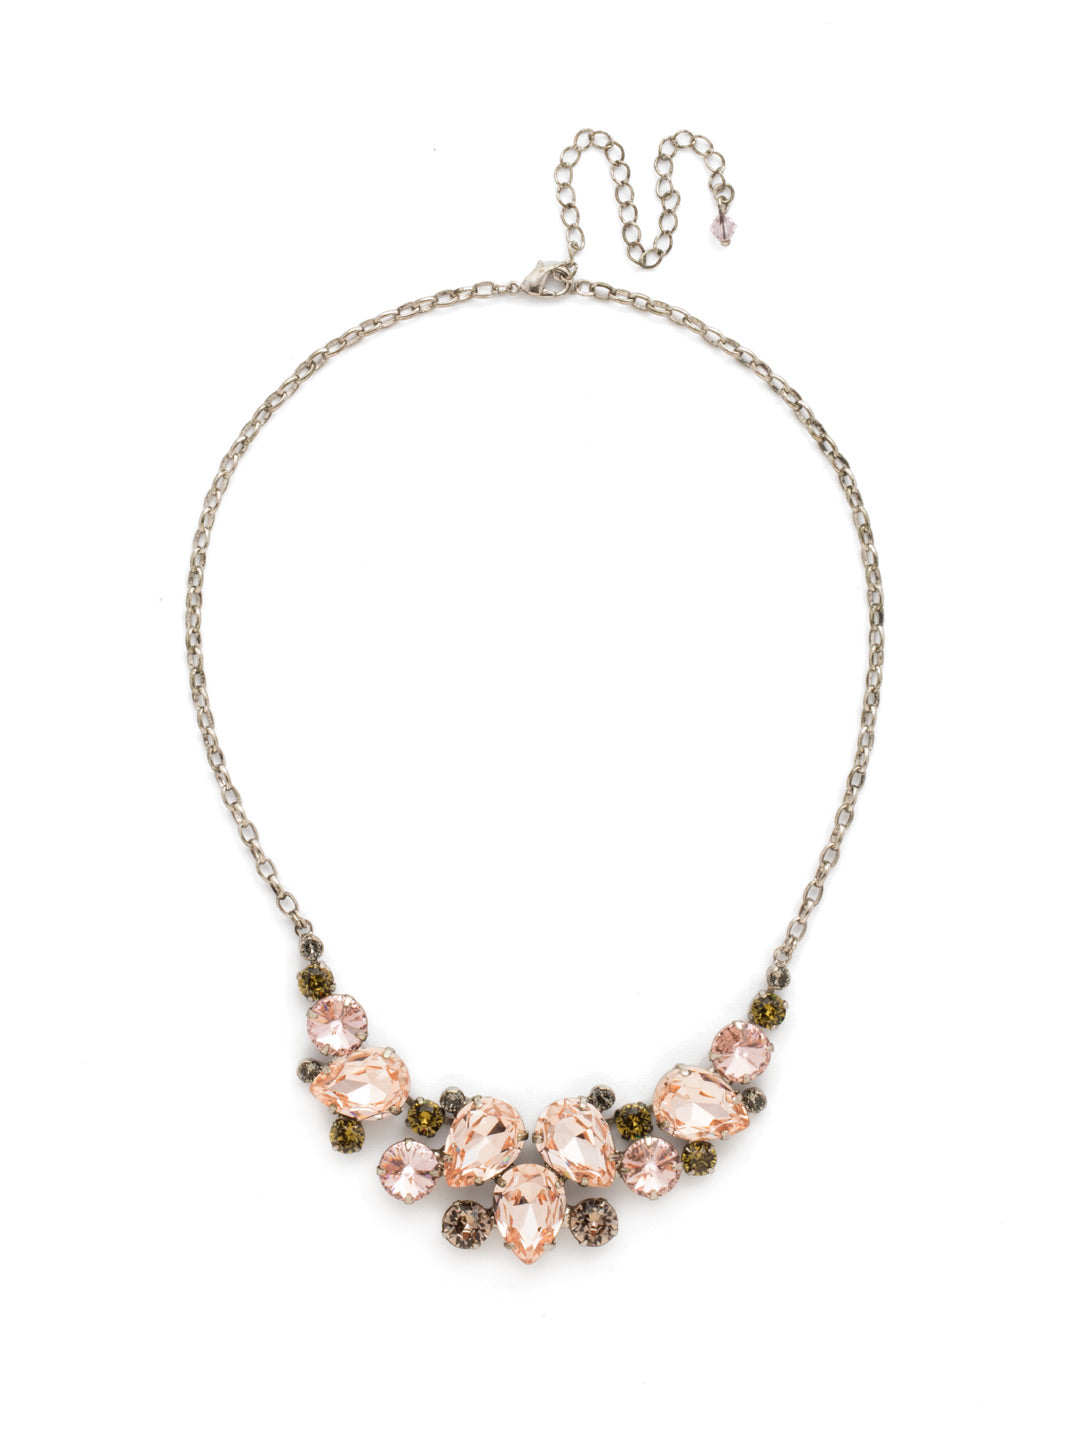 Nested Pear Statement Necklace - NDJ14ASAG